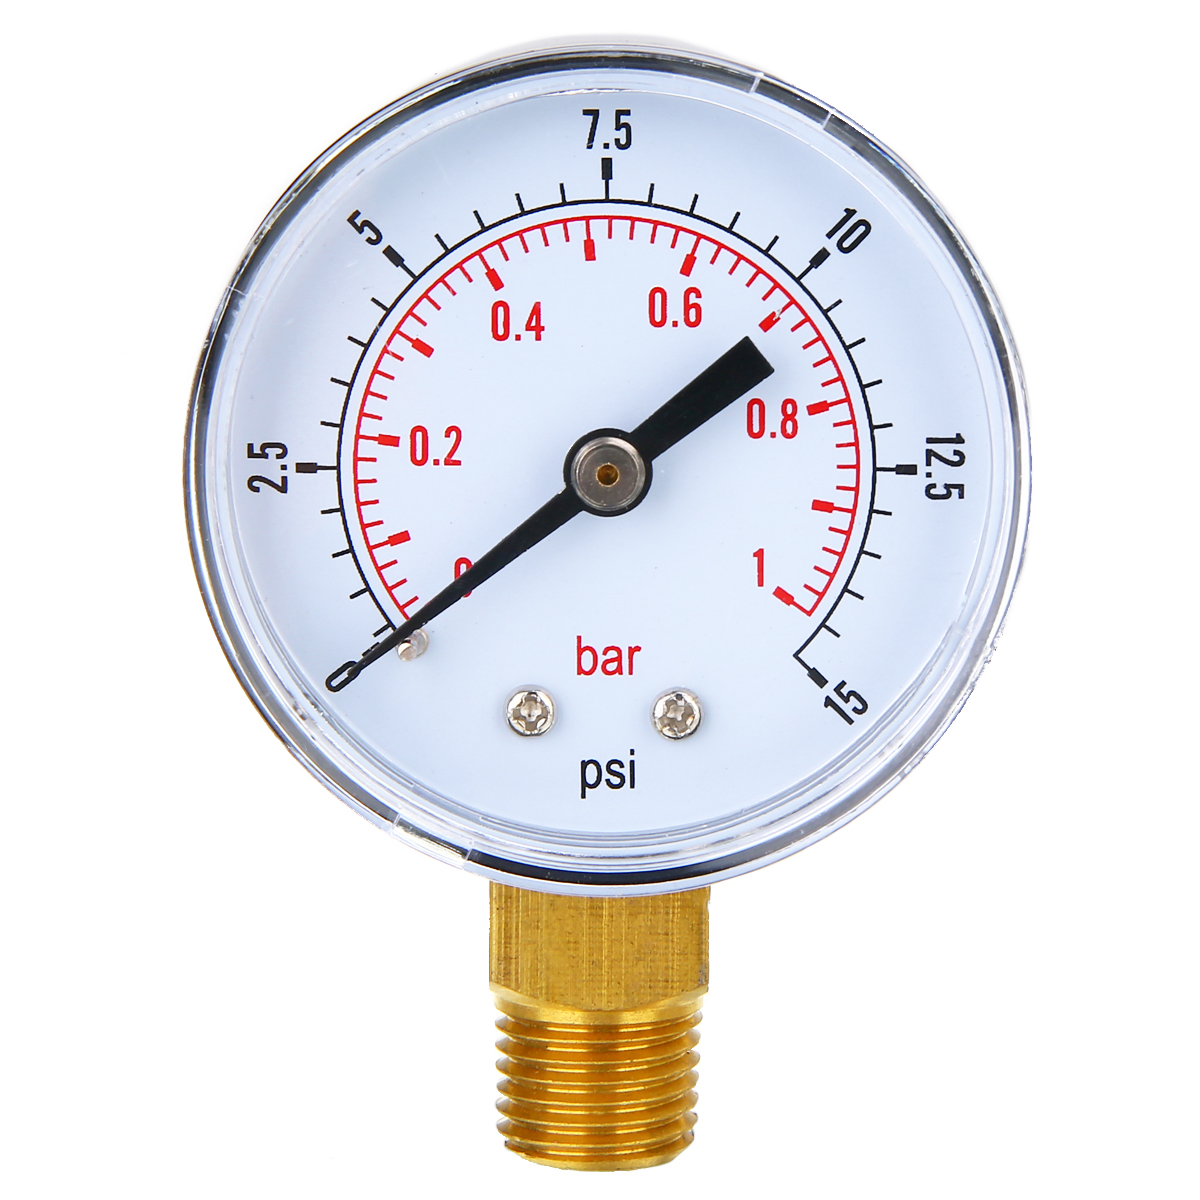 Pressure Gauge for Air Oil Gas Water 0-600mbar TS-Y504-15psi 1/4BSPT Thread 